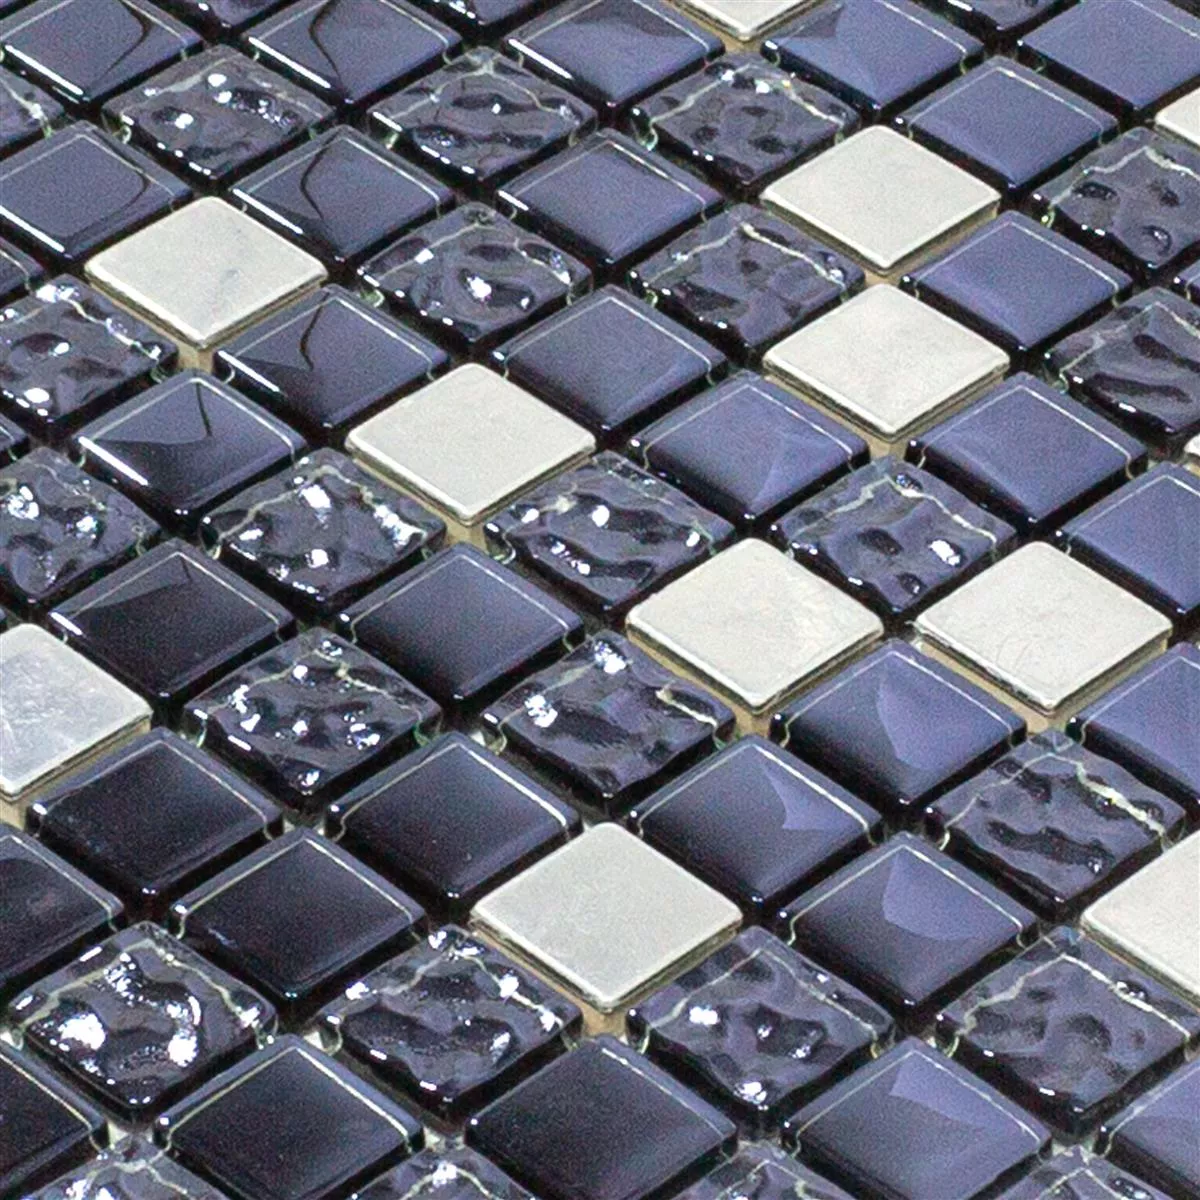 Sample Mosaic Tiles Glass Stainless Steel Blackriver Black Silver Mix